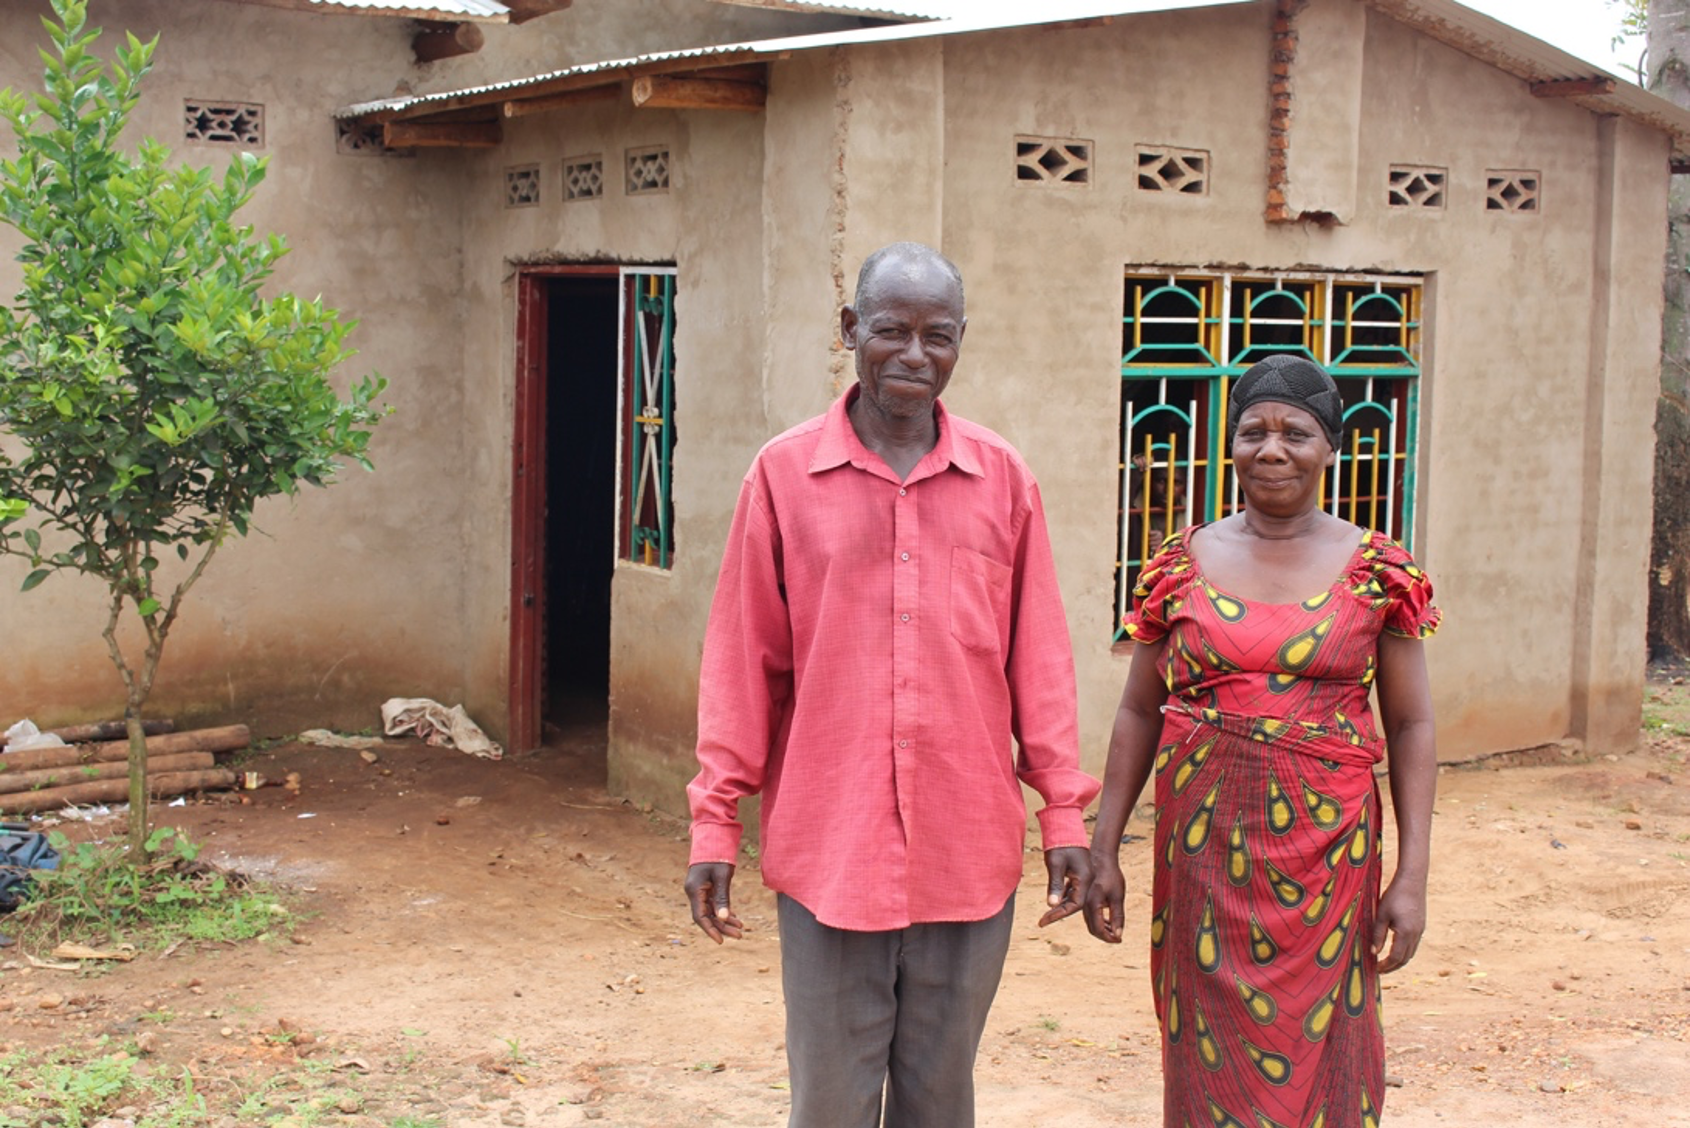 Angeline and Alphonse stand in front of their house